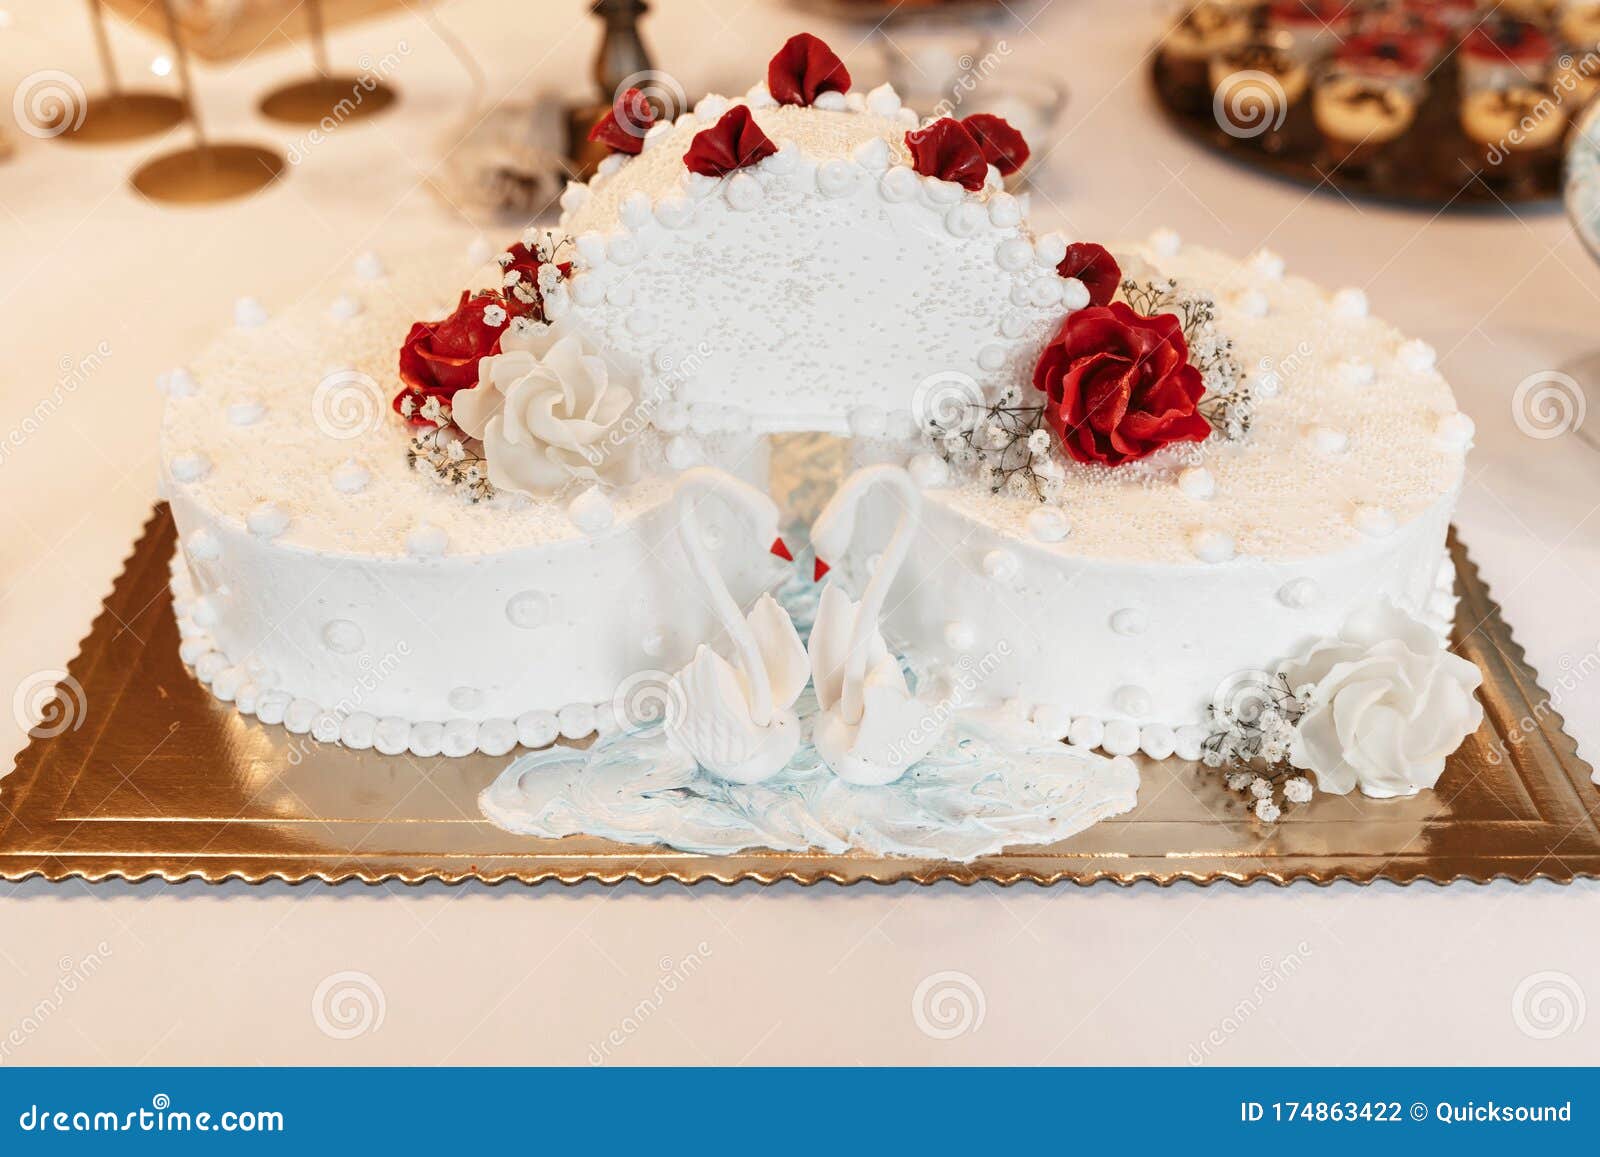 White Wedding Cake with Two Sugary Swans and Red Roses Stock Photo ...